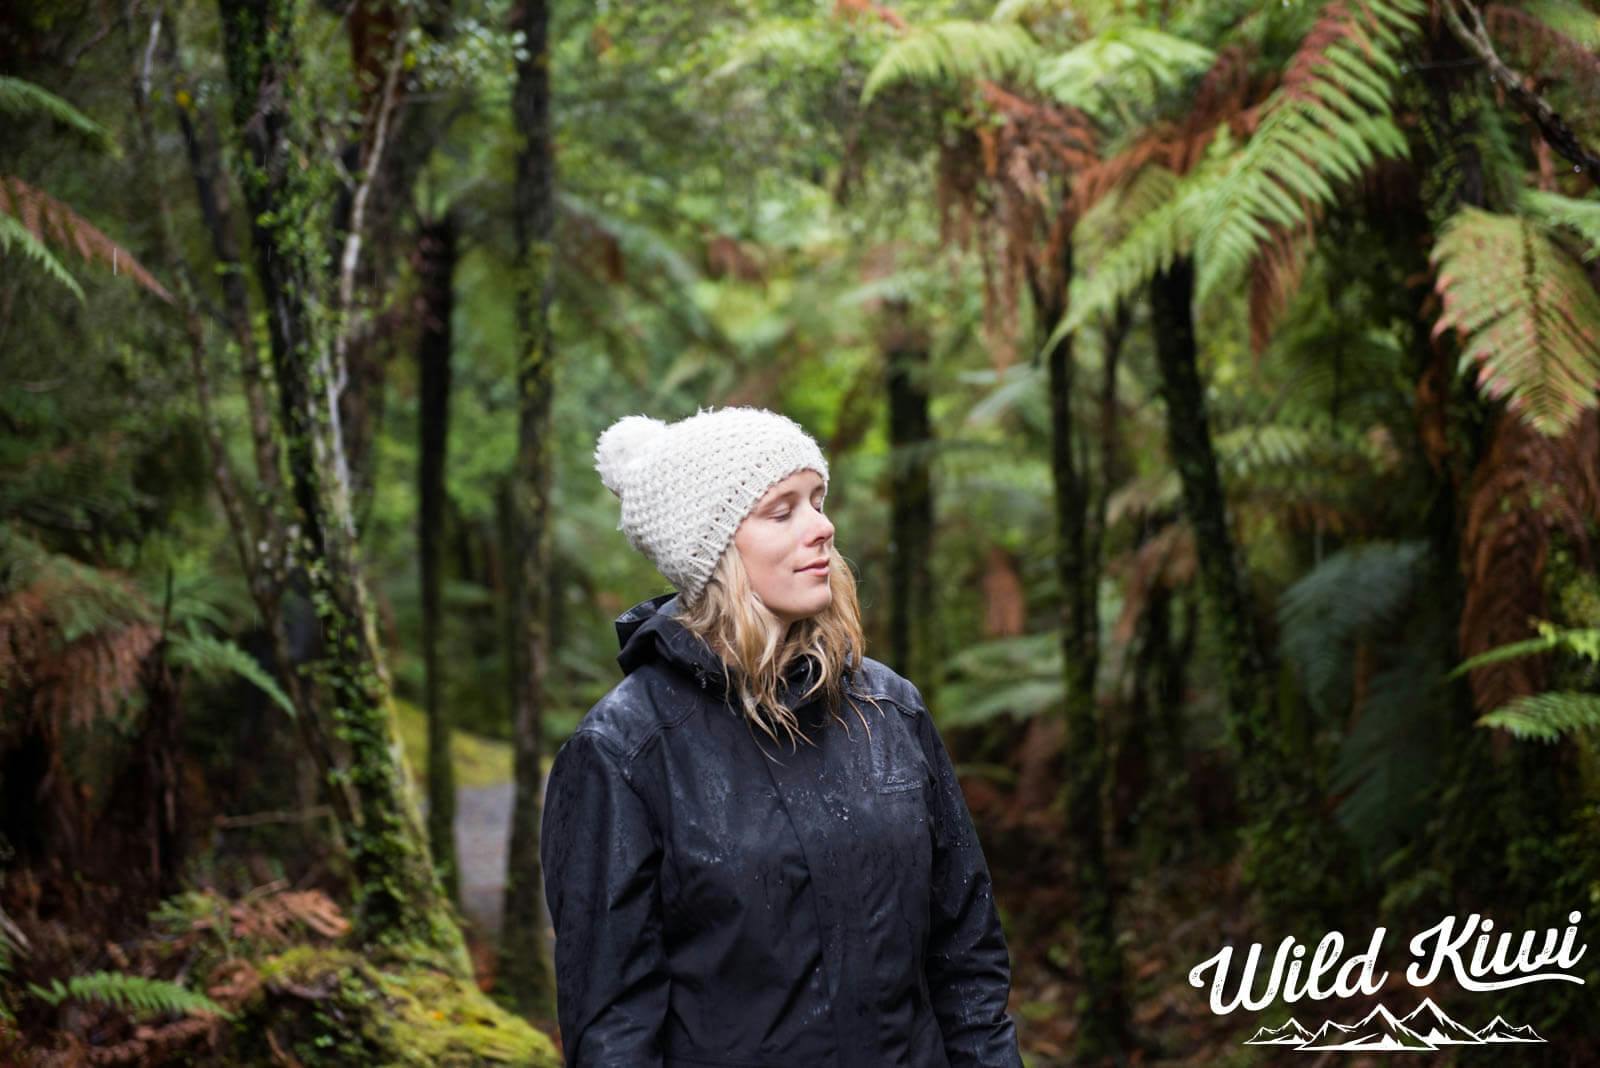 Travel to amazing parts of New Zealand - See the wild woods up close